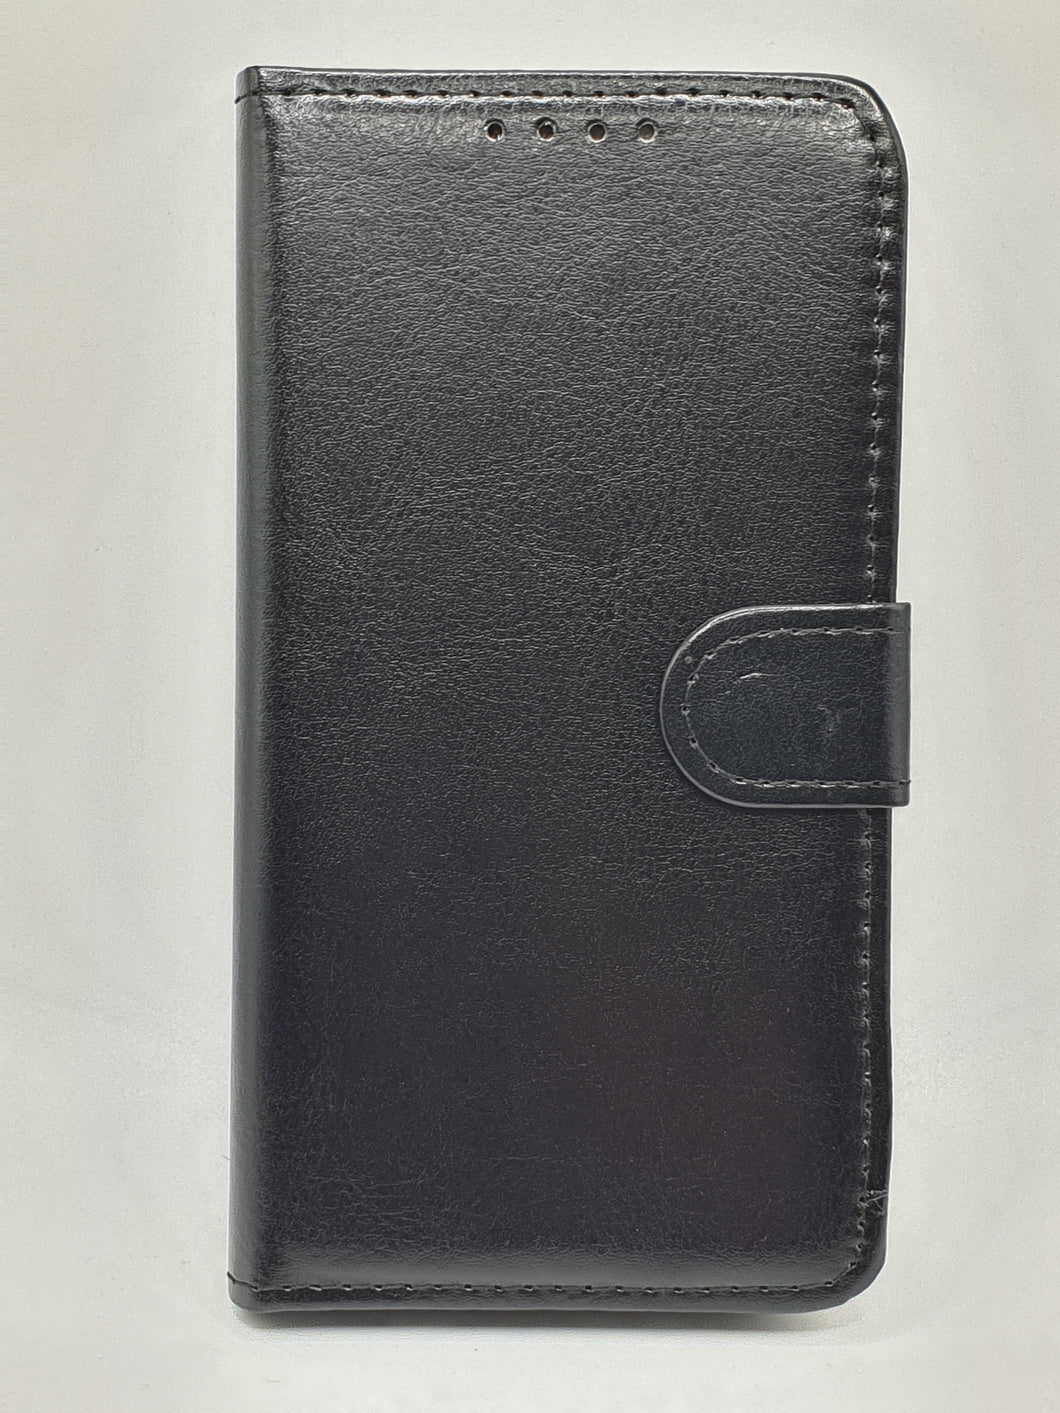 Samsung A10 Wallet Card Insert Case Faux Leather Black Full Protection Stand Up Cover